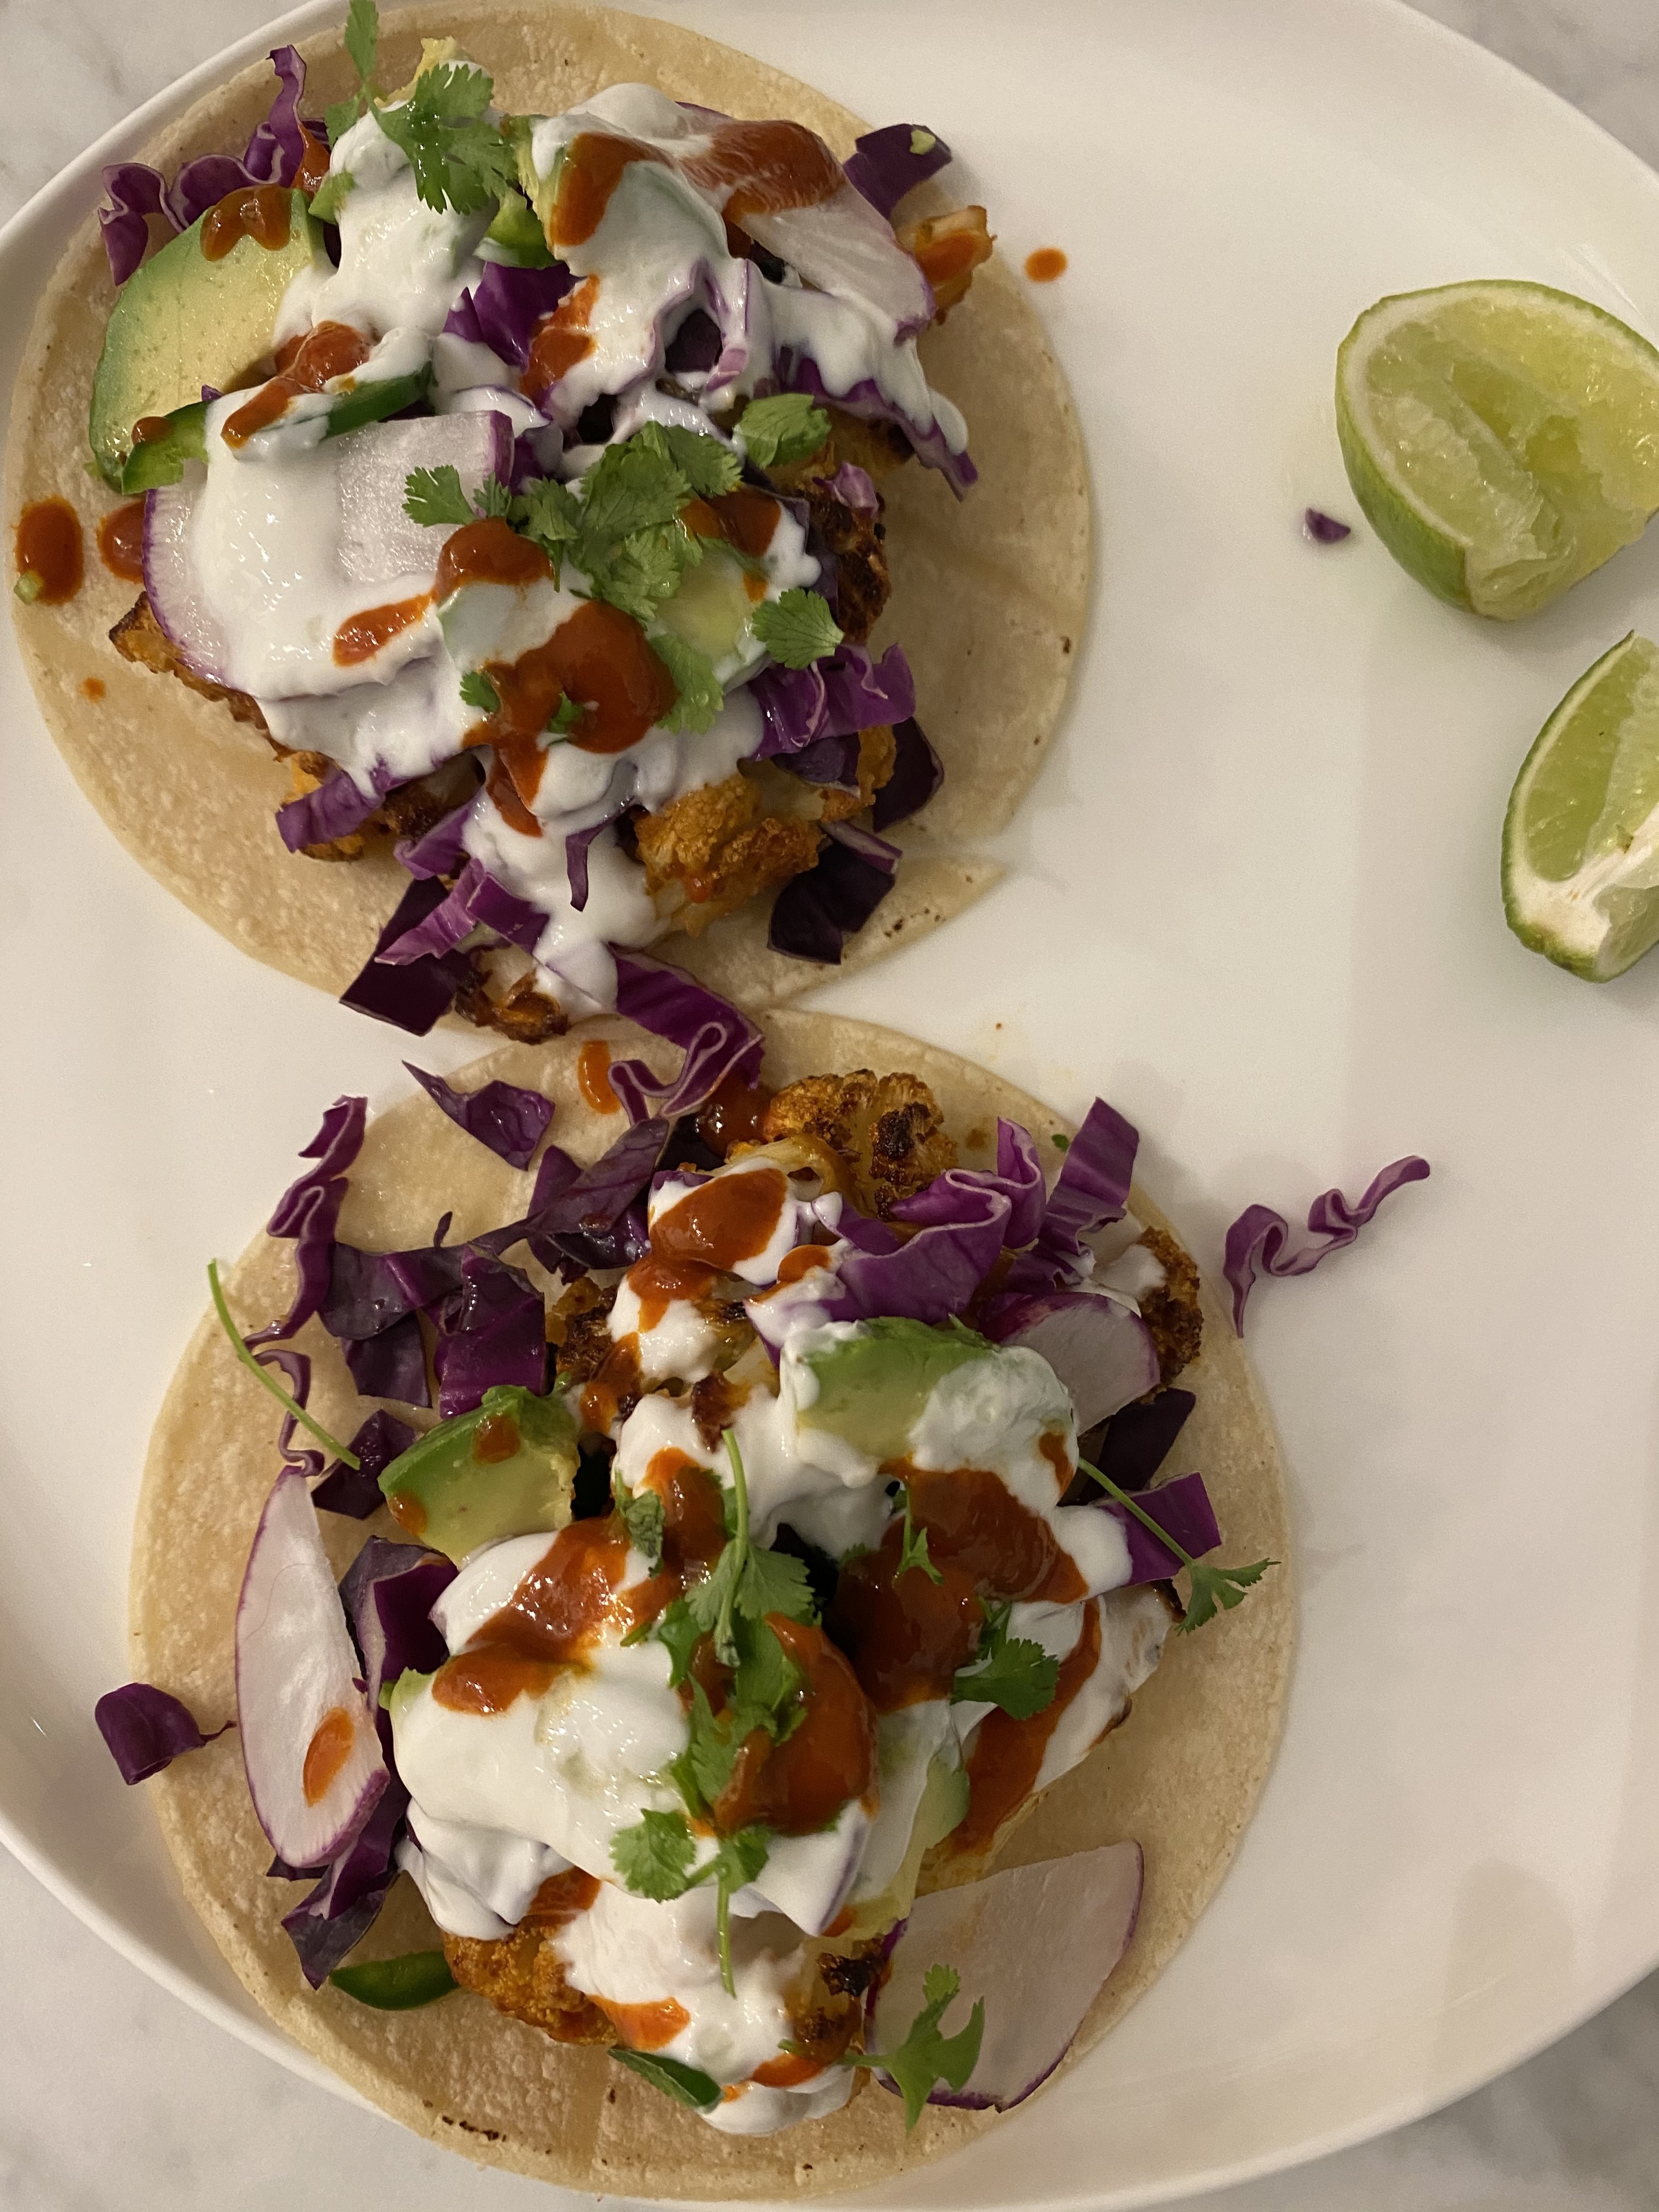 Two chipotle cauliflower tacos topped with cabbage, radish, avocado, and garlic aioli.